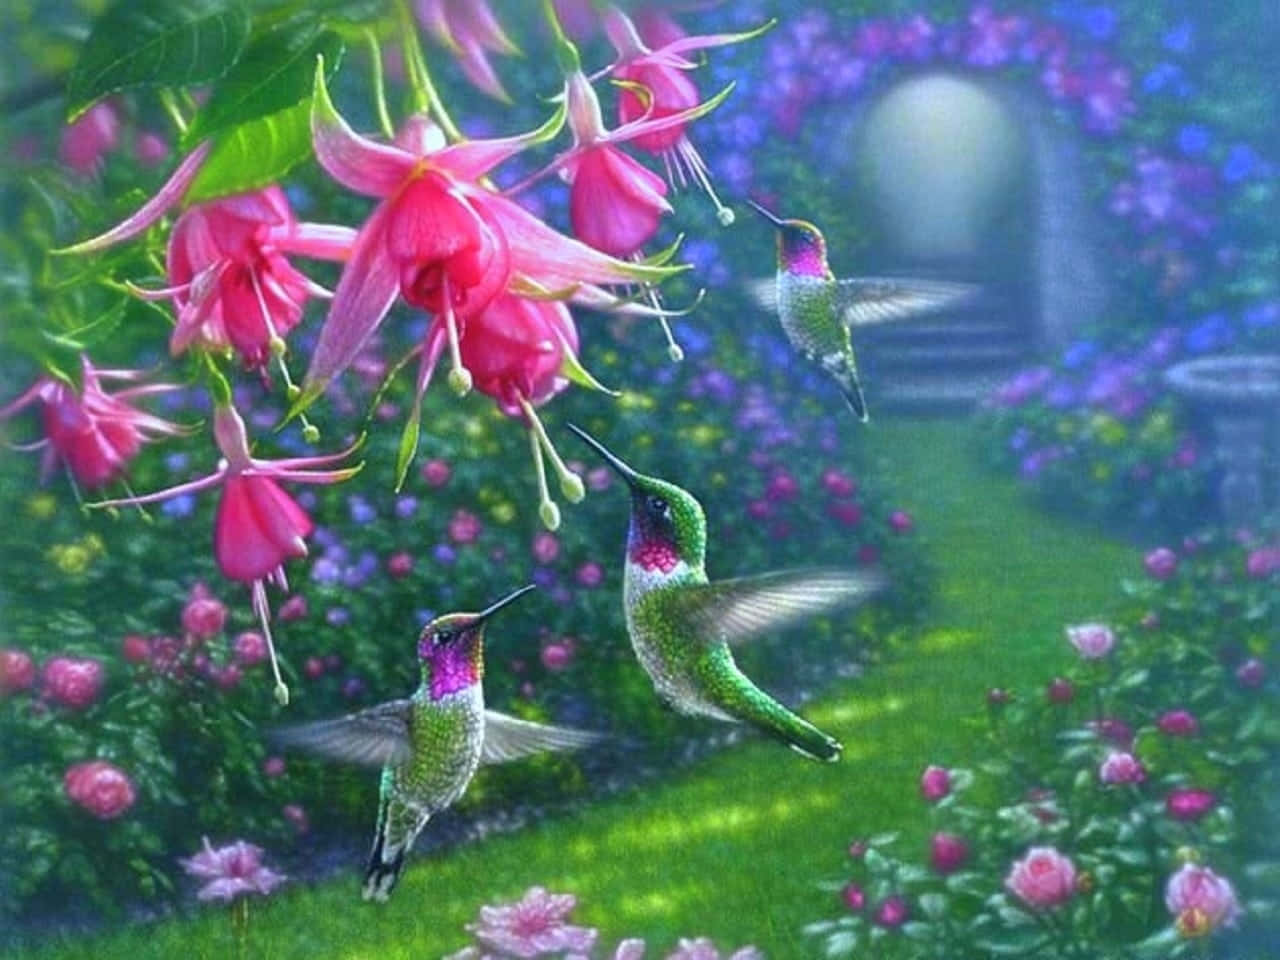 Caption: Chirpy Birds Perched on Blossoming Branch in Spring Wallpaper